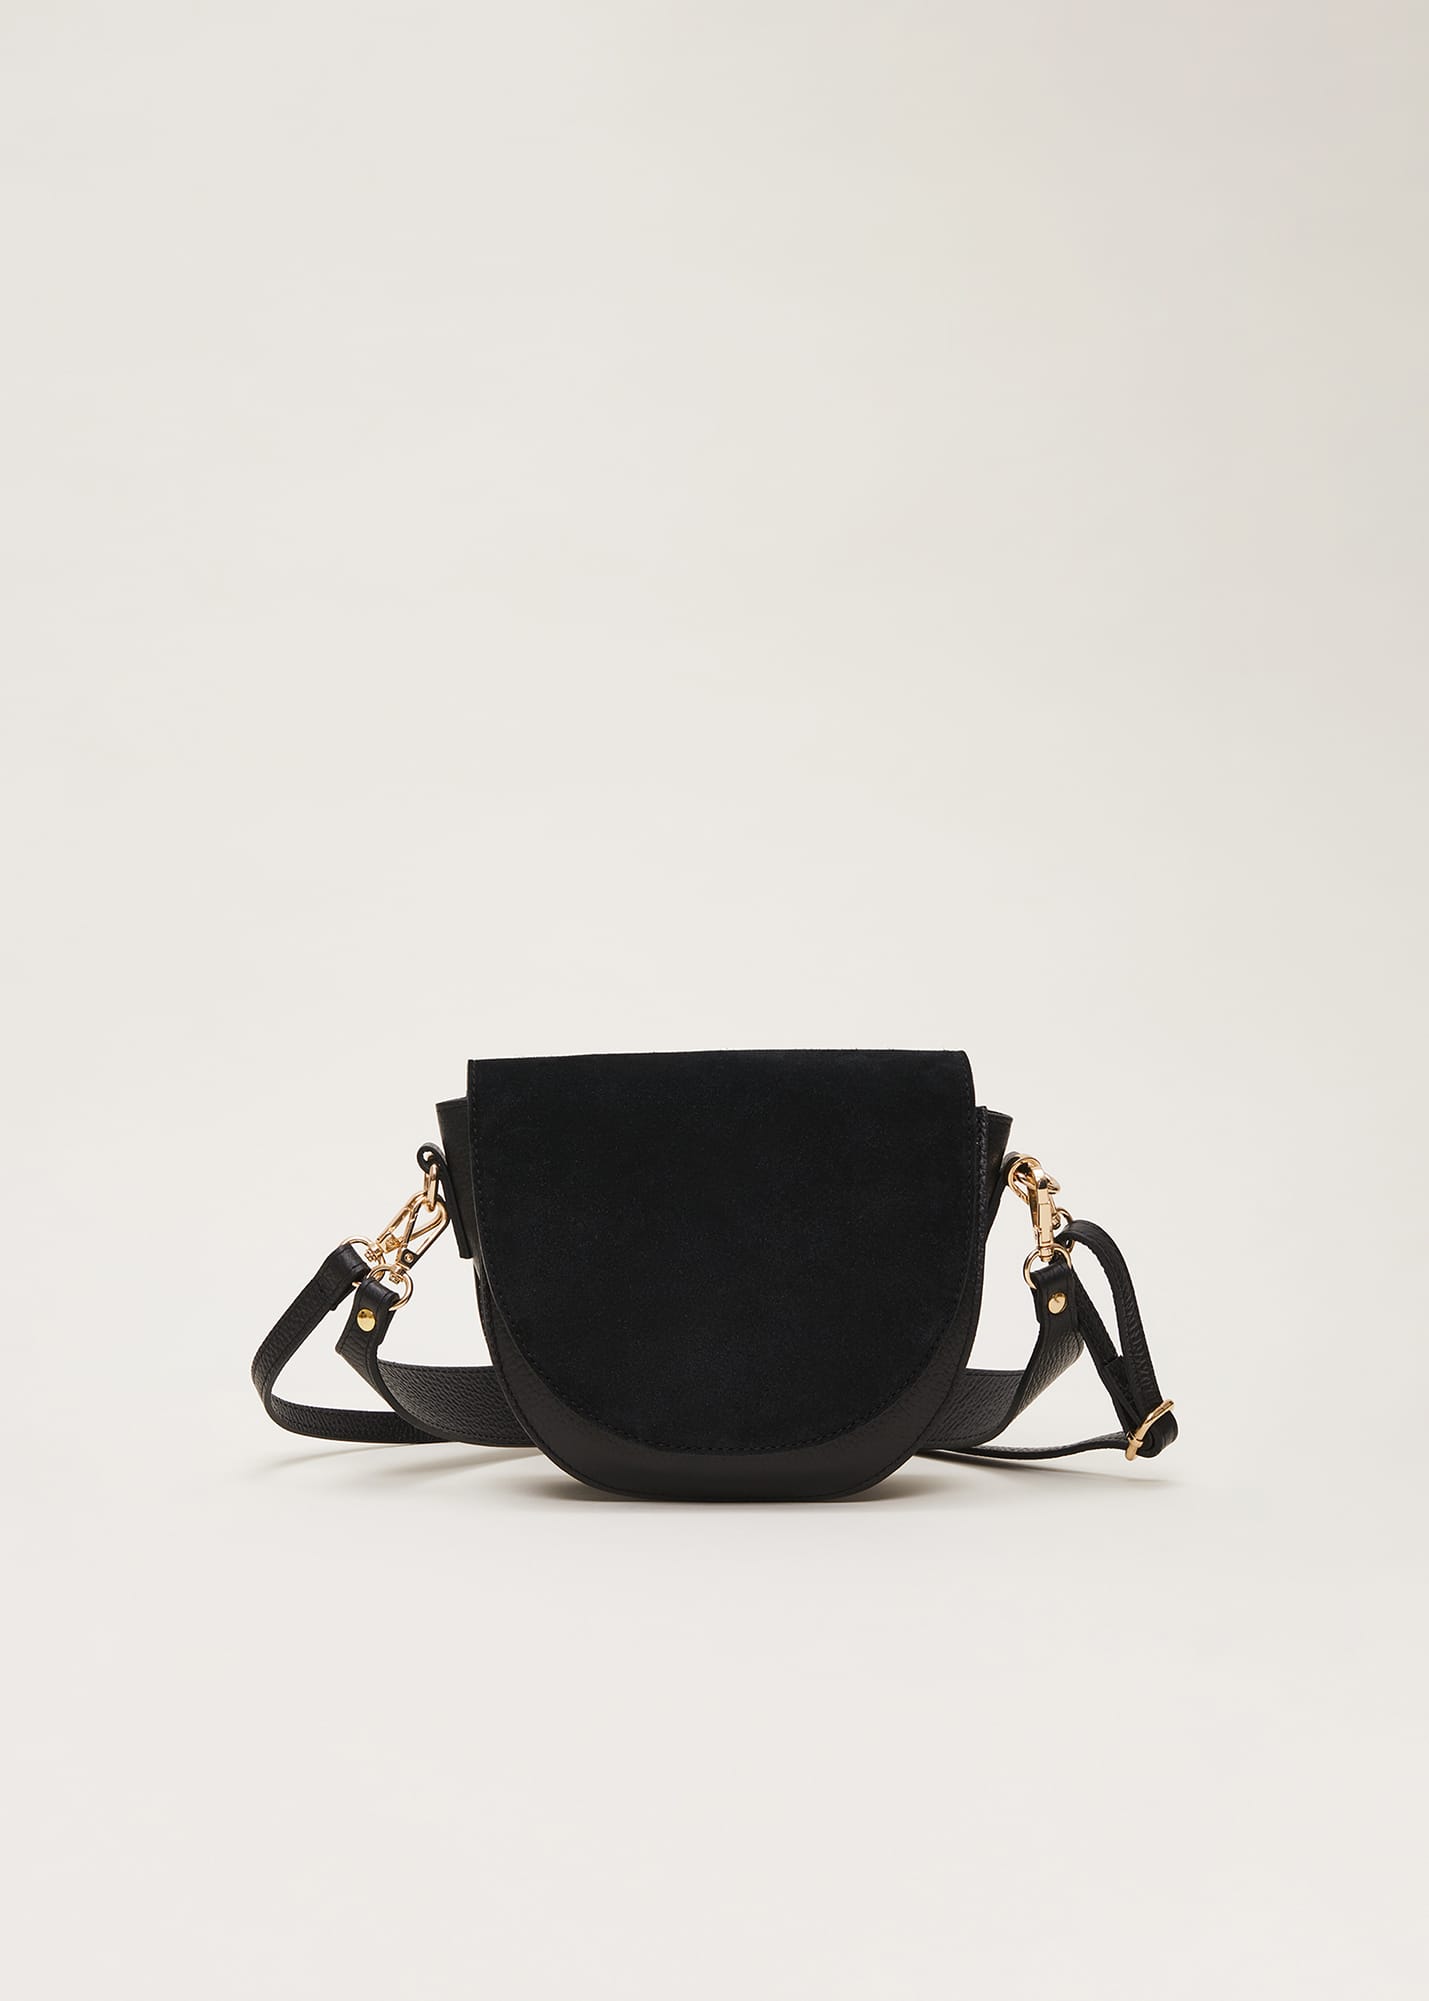 Phase Eight Women's Suede Cross Body Bag